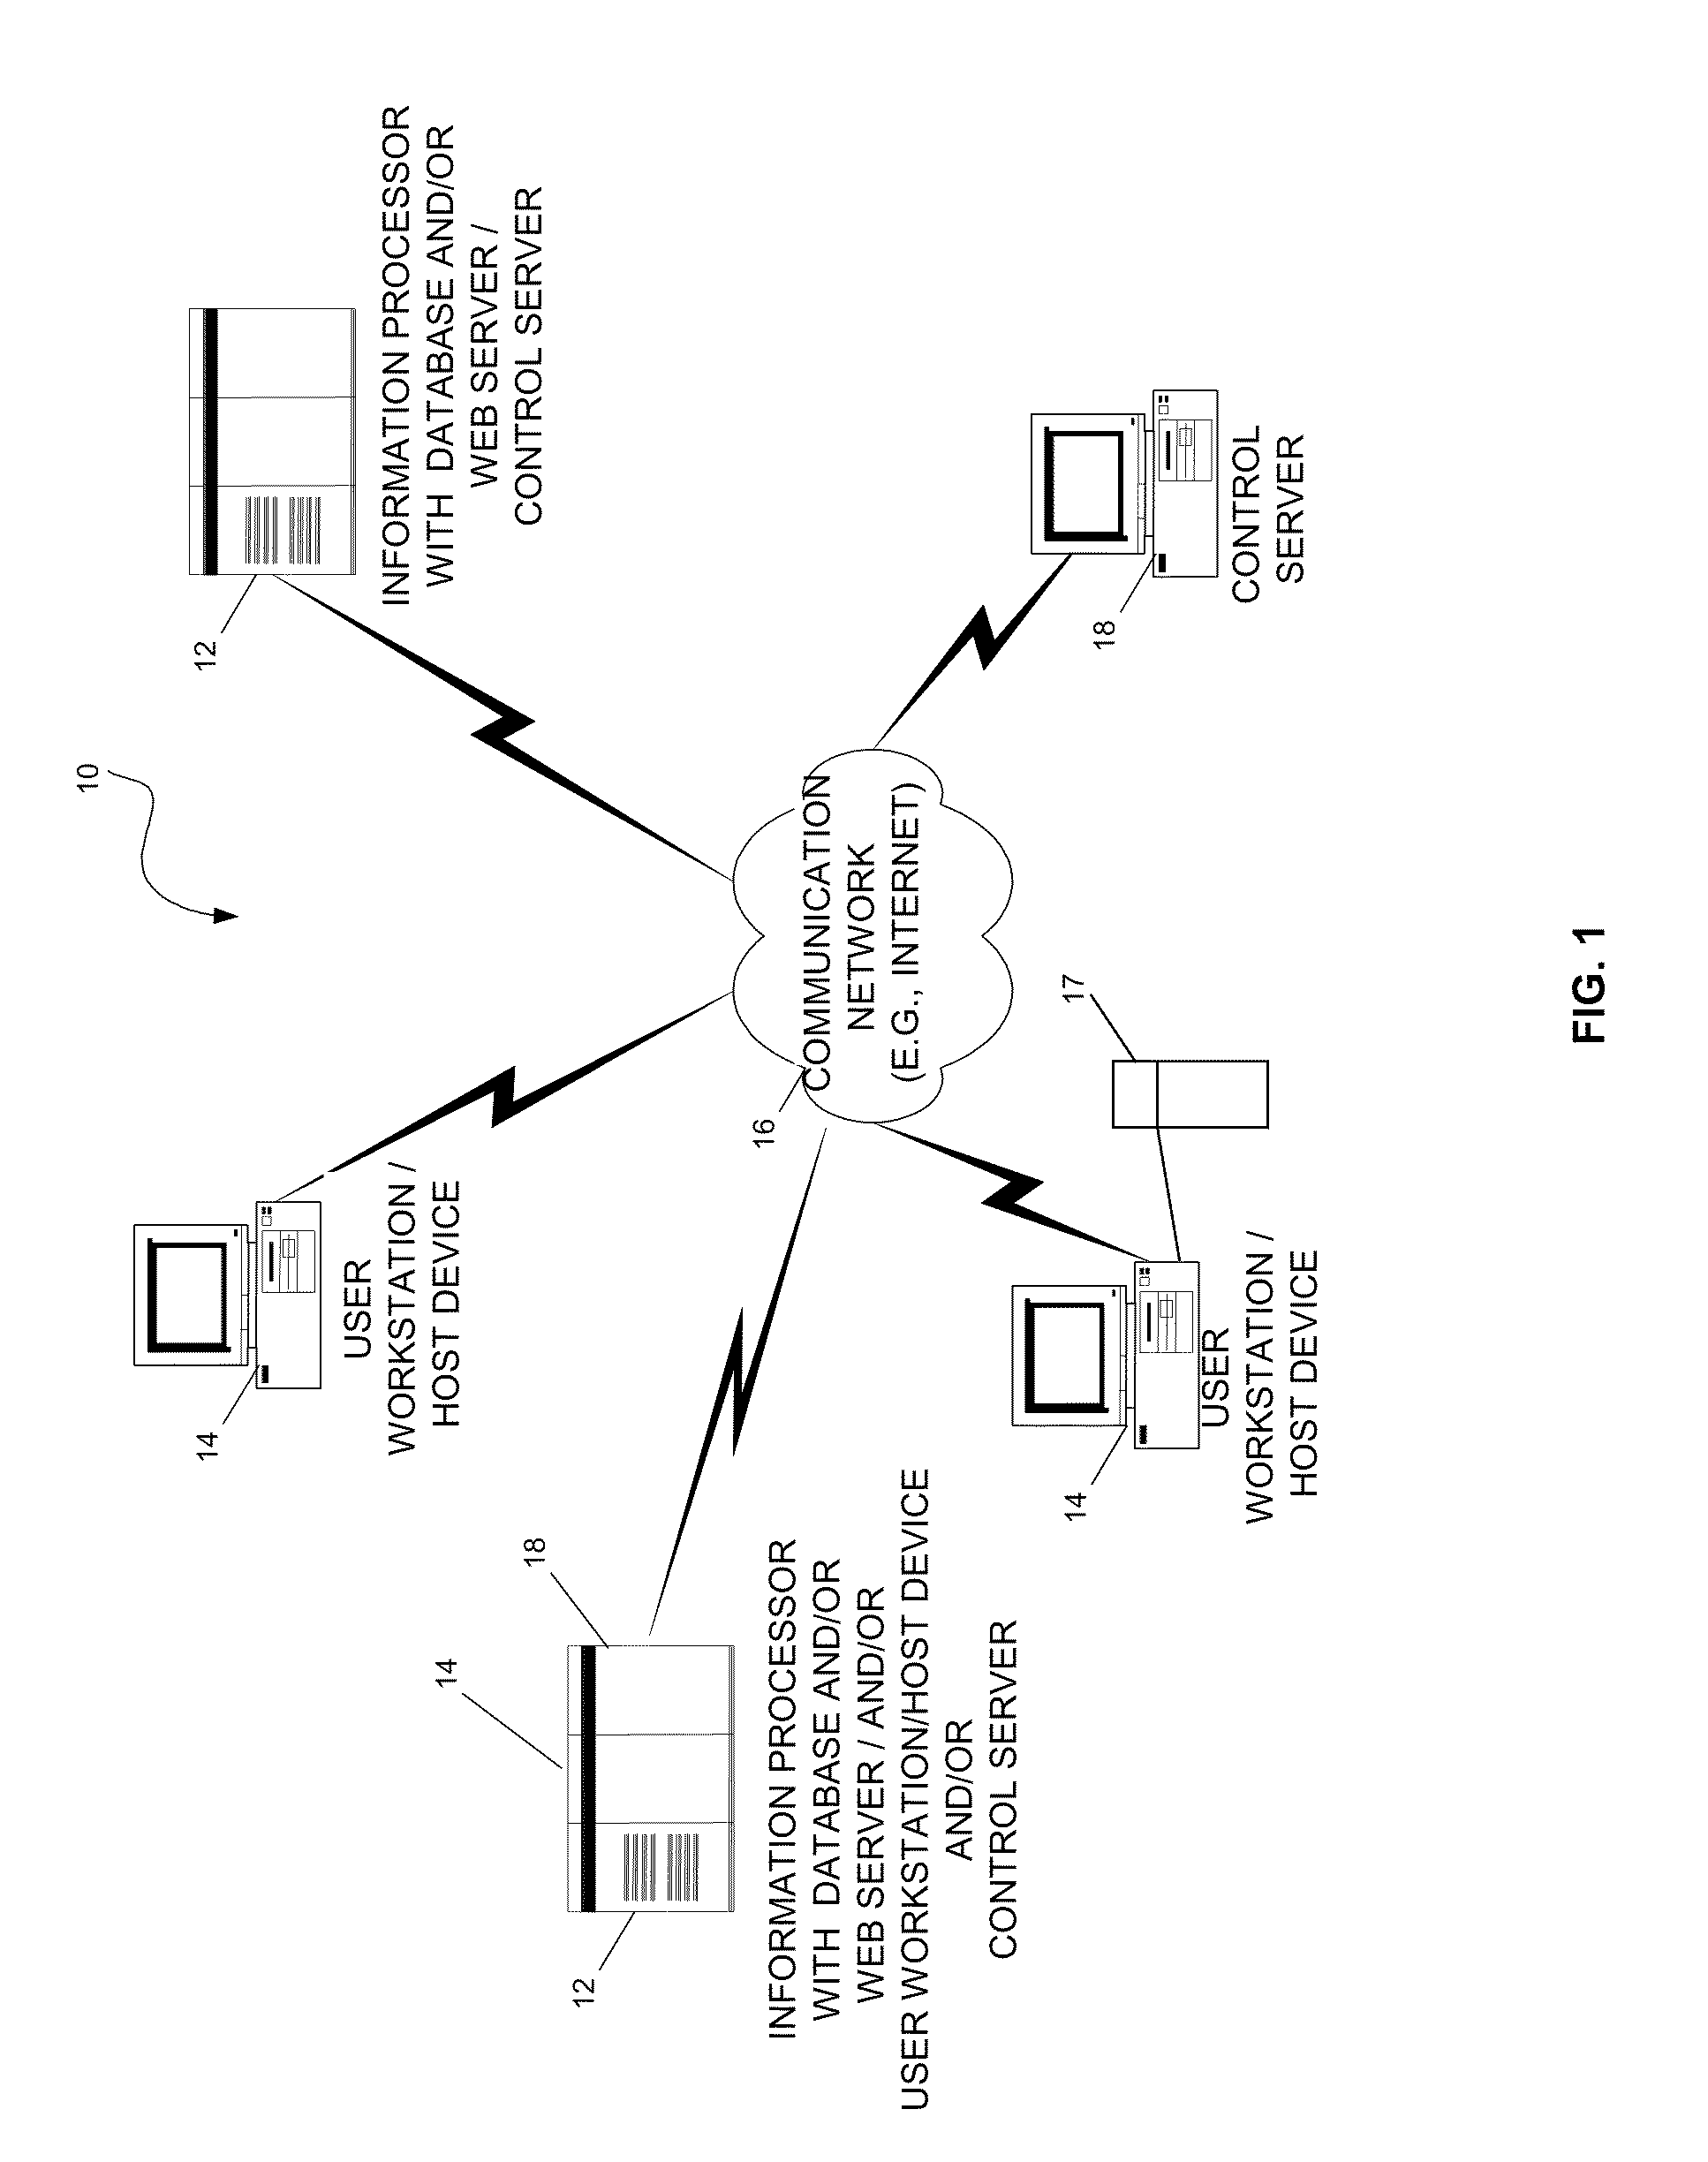 Application authentication system and method